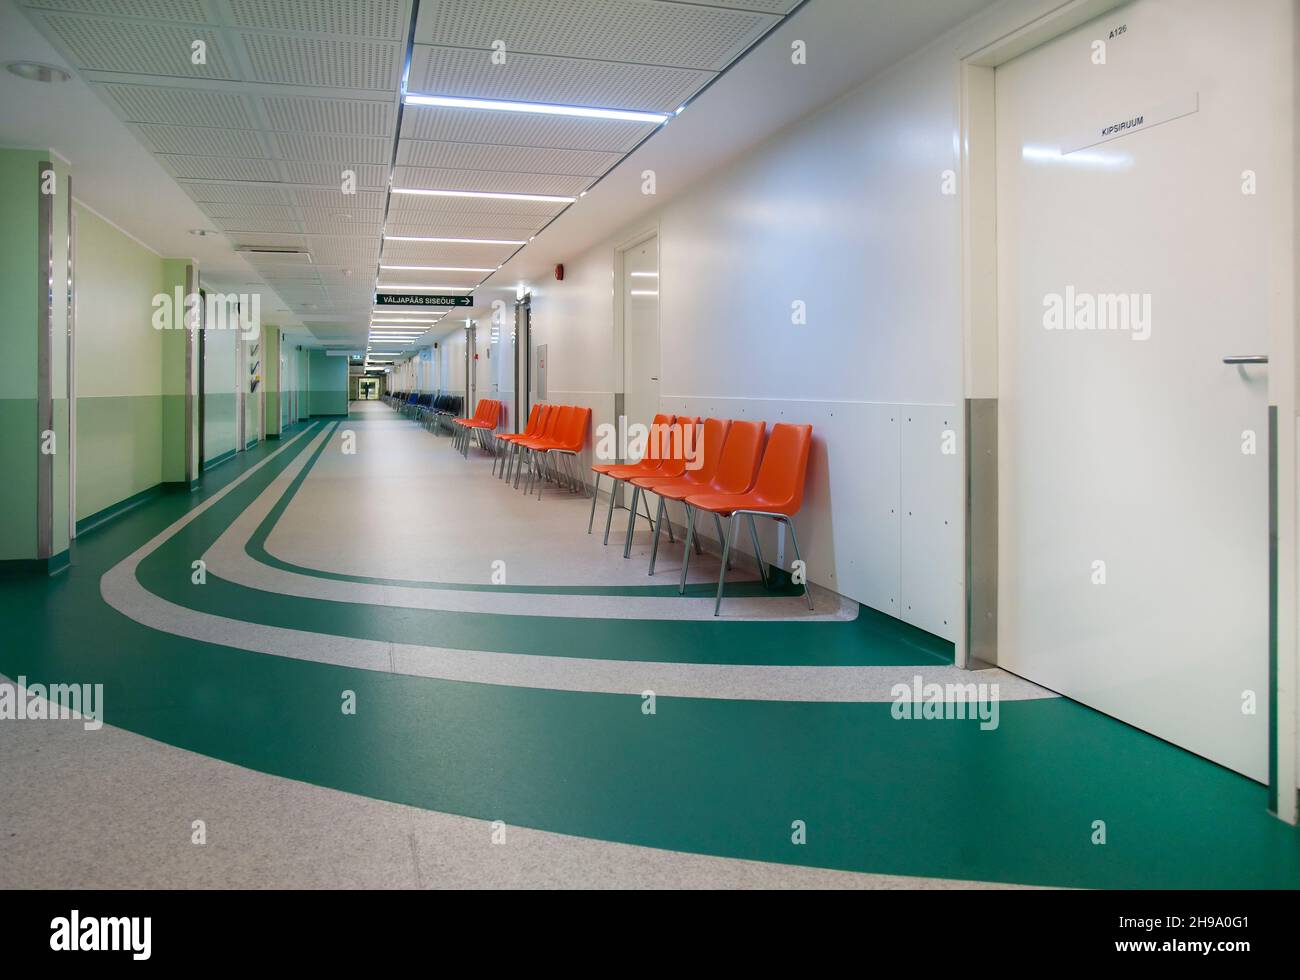 Corridor and waiting areas of a modern hospital with seating Stock Photo